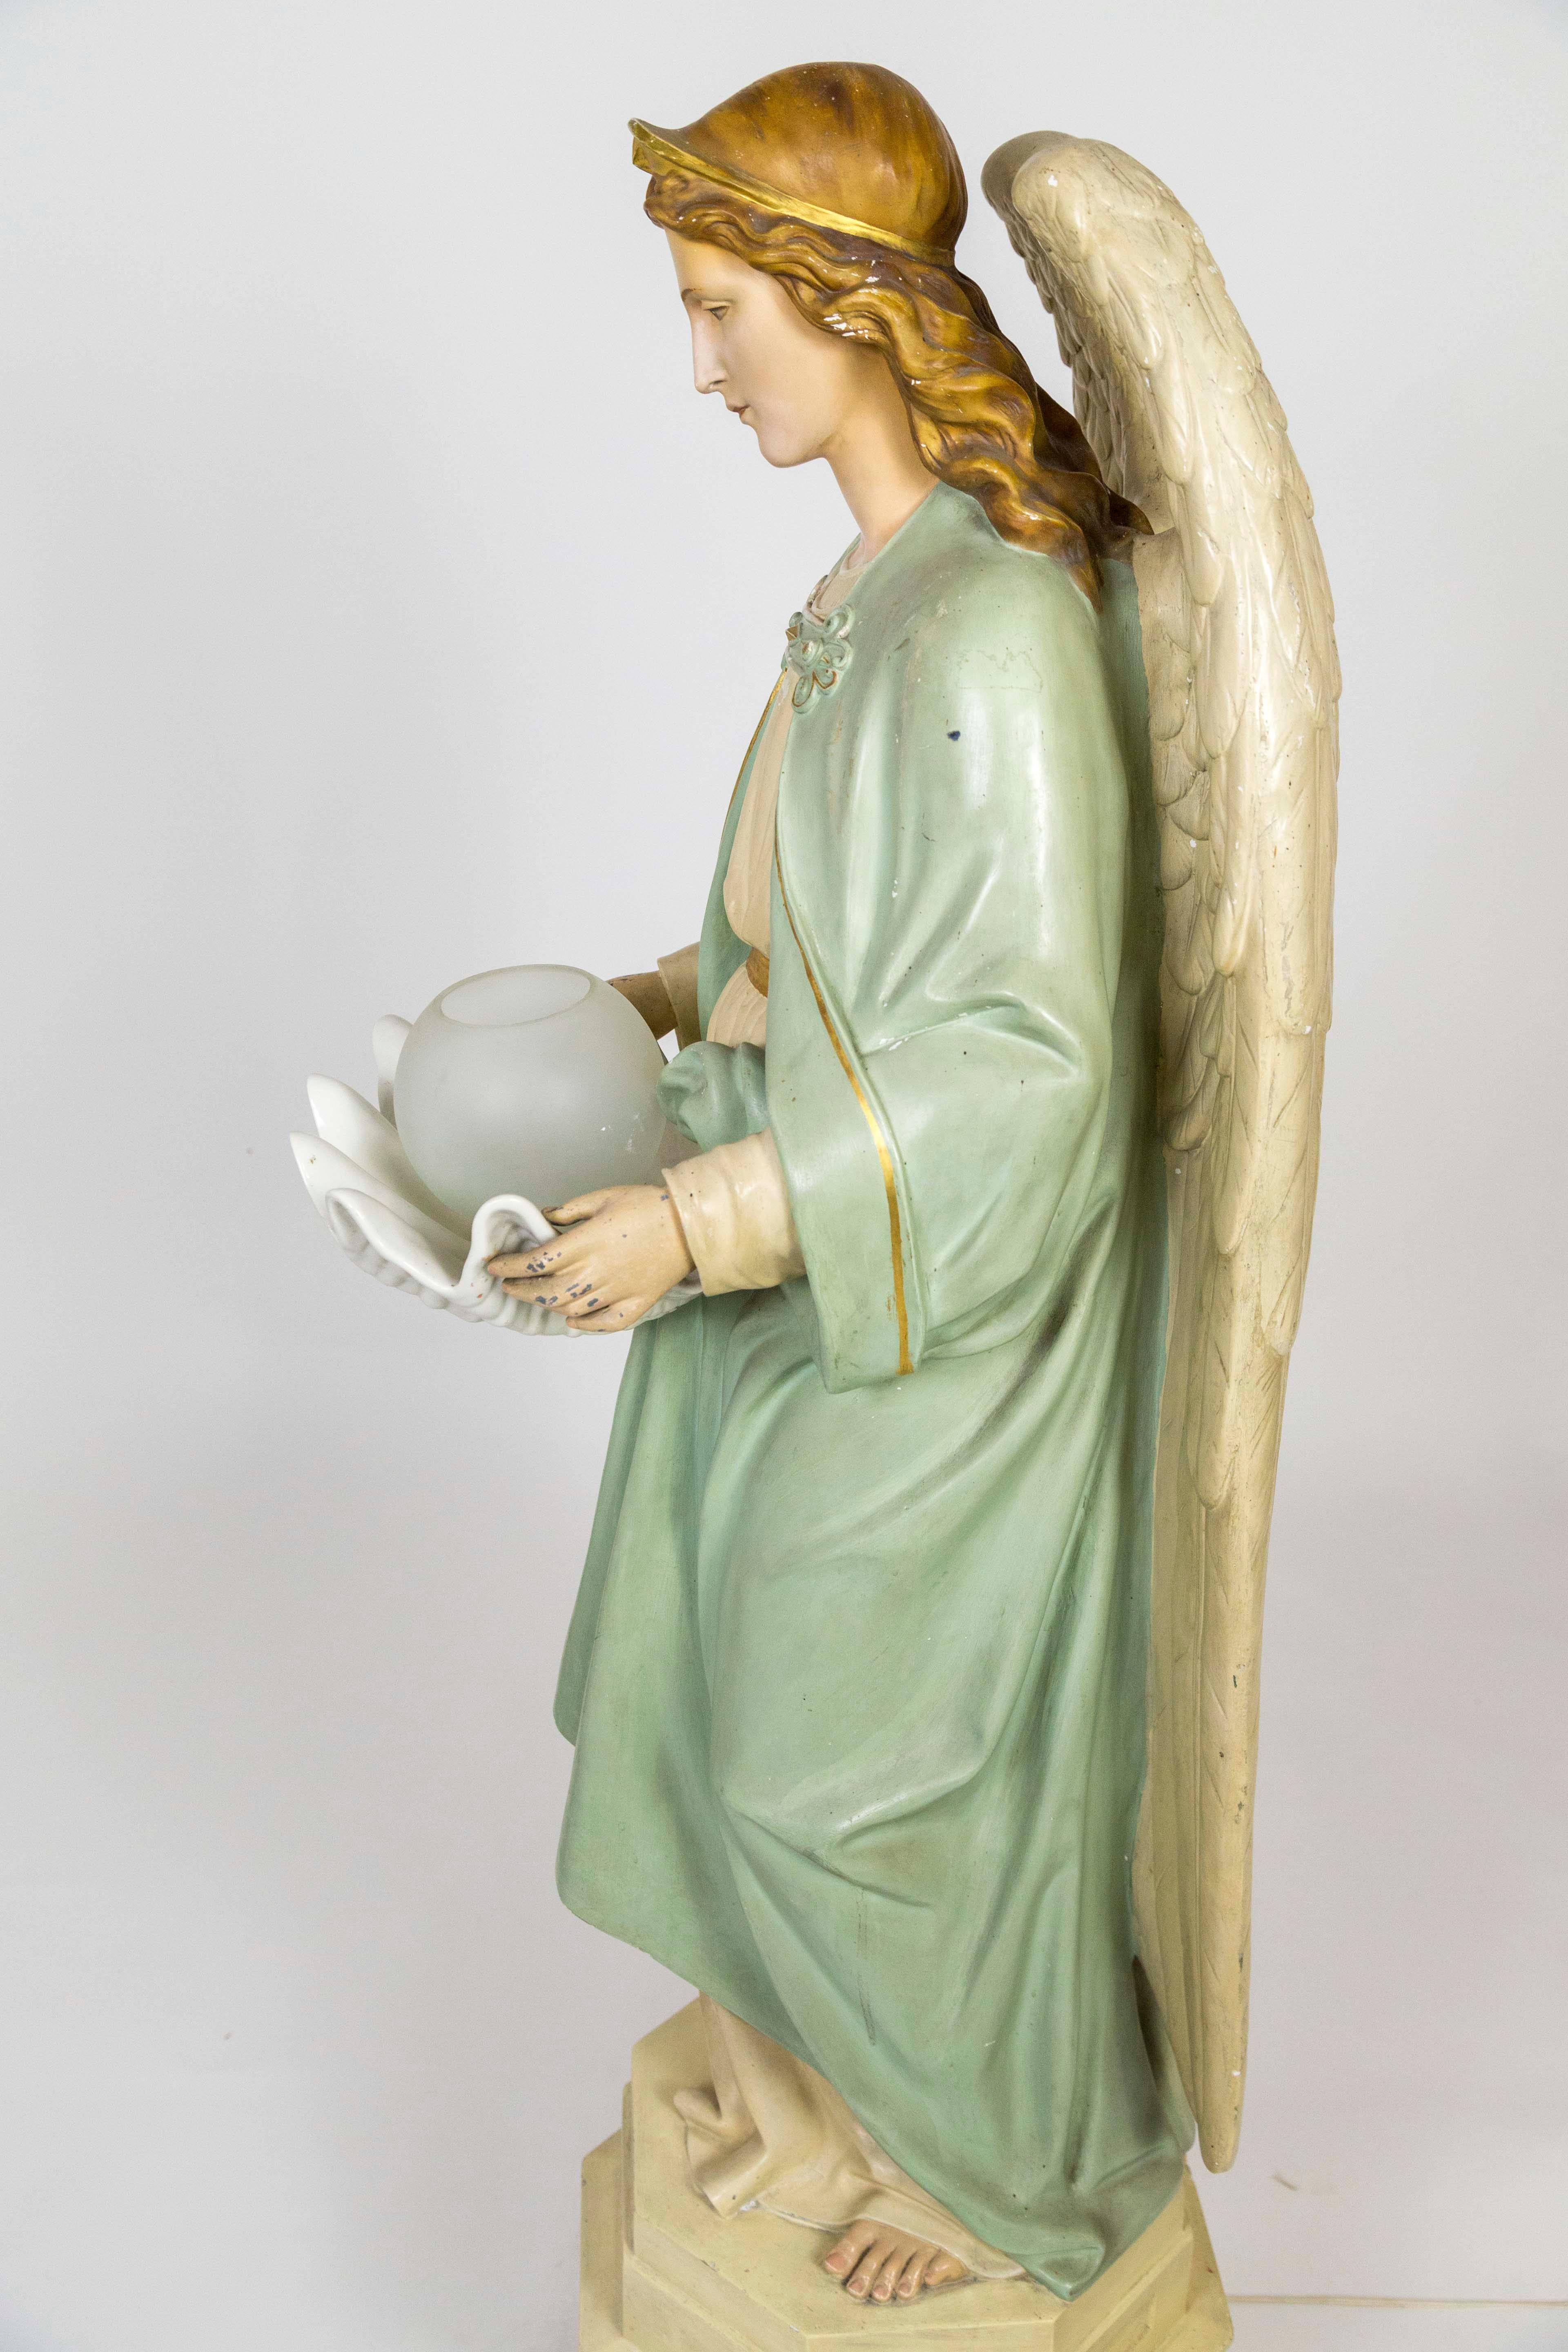 Life-size Angel Statue Holding Porcelain Clam Shell Bowl with Light 5